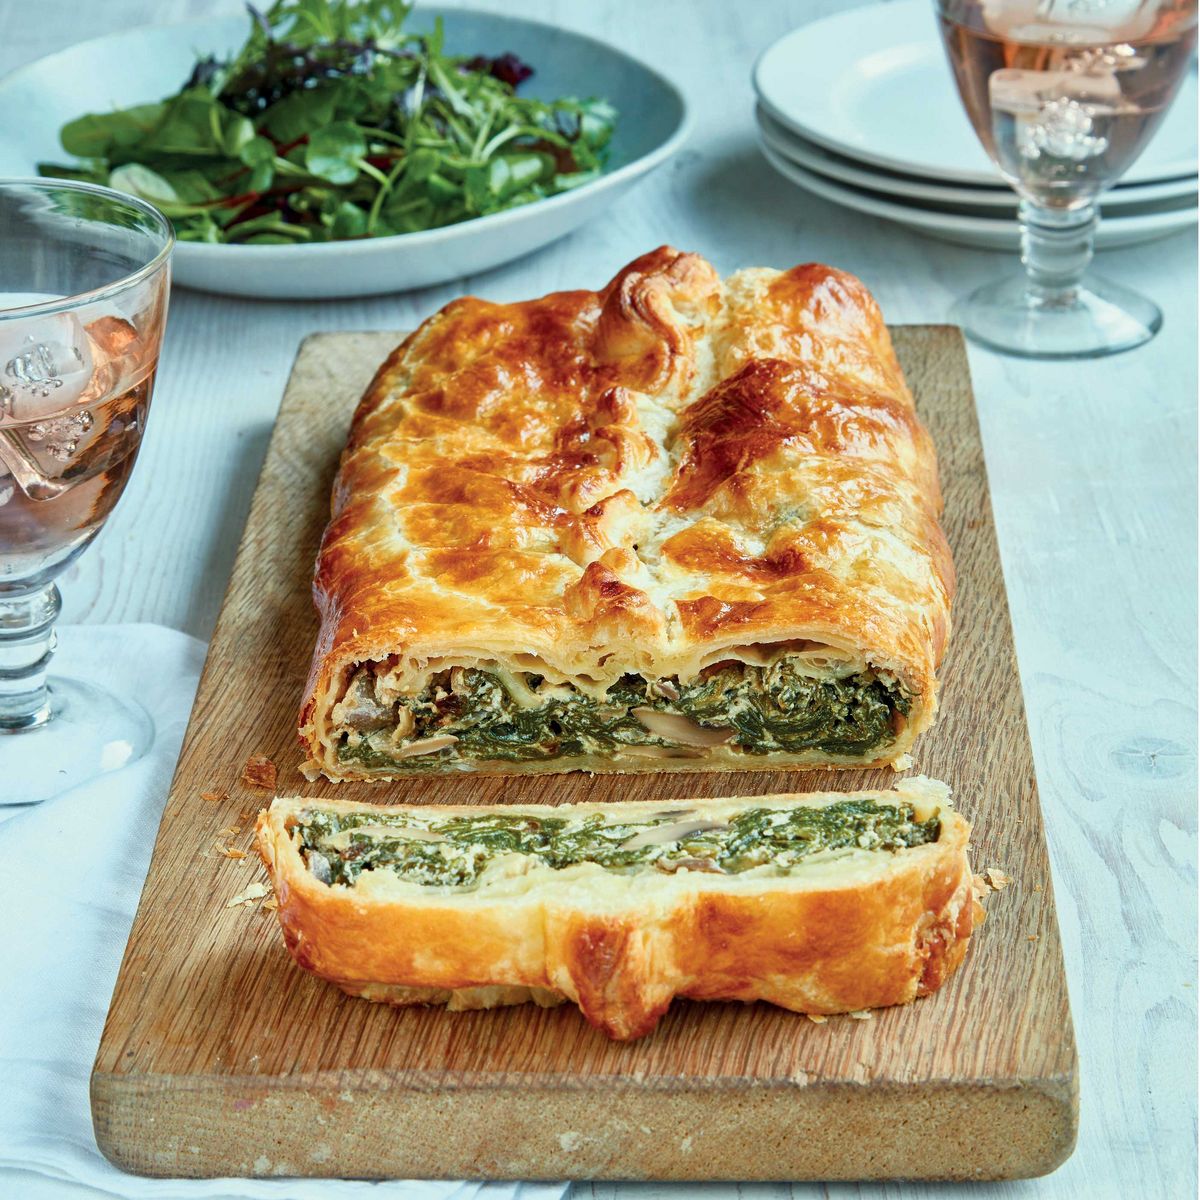 Best Mary Berry Vegetarian Recipes | Curry, Quiche, Pasta & More